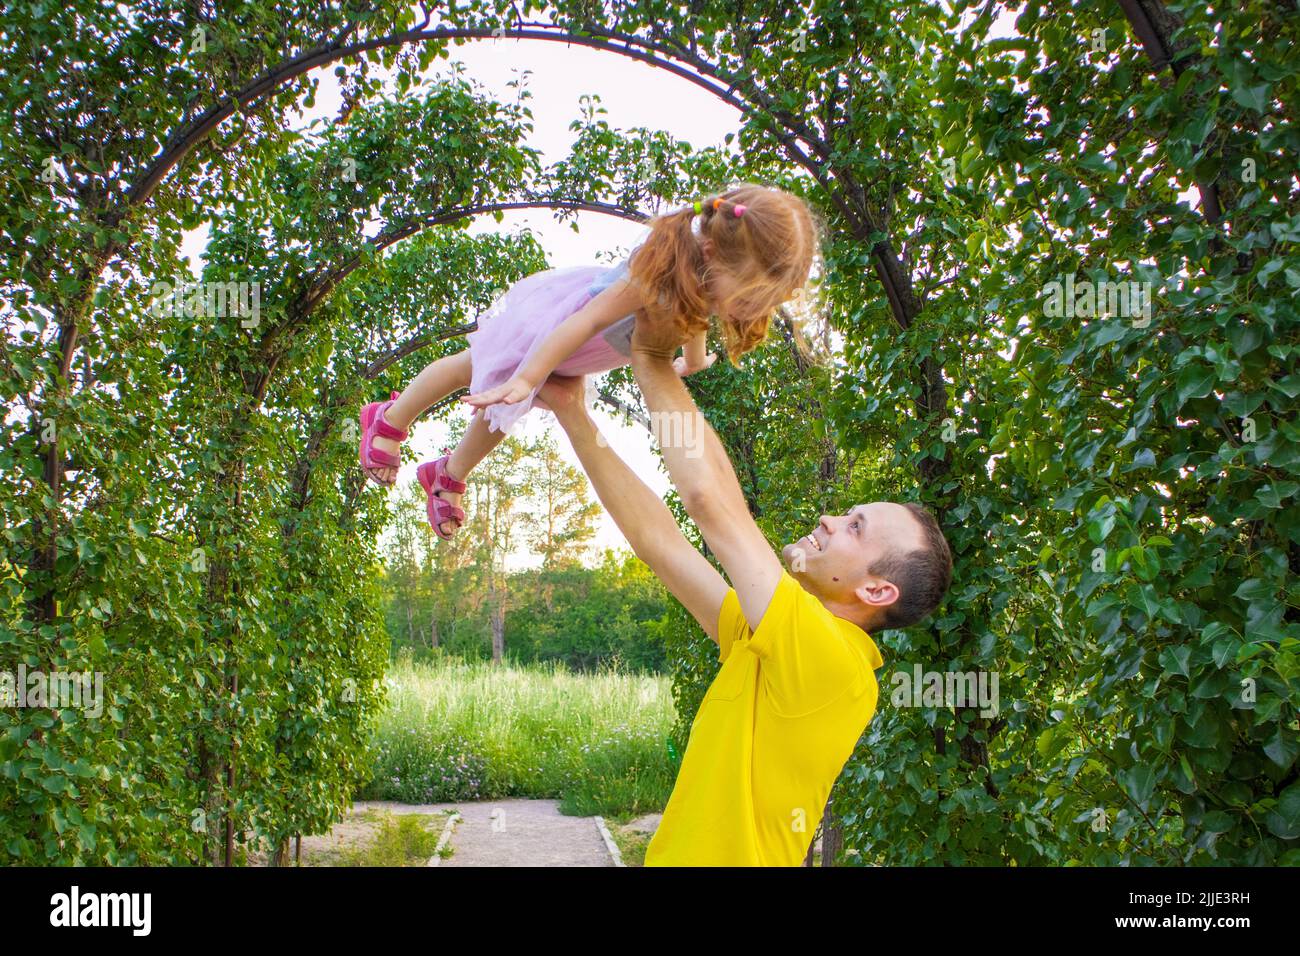 dad and daughter are dancing in nature.a little ballerina dances with her dad. little princess.dad holds his daughter in his arms. dance support Stock Photo